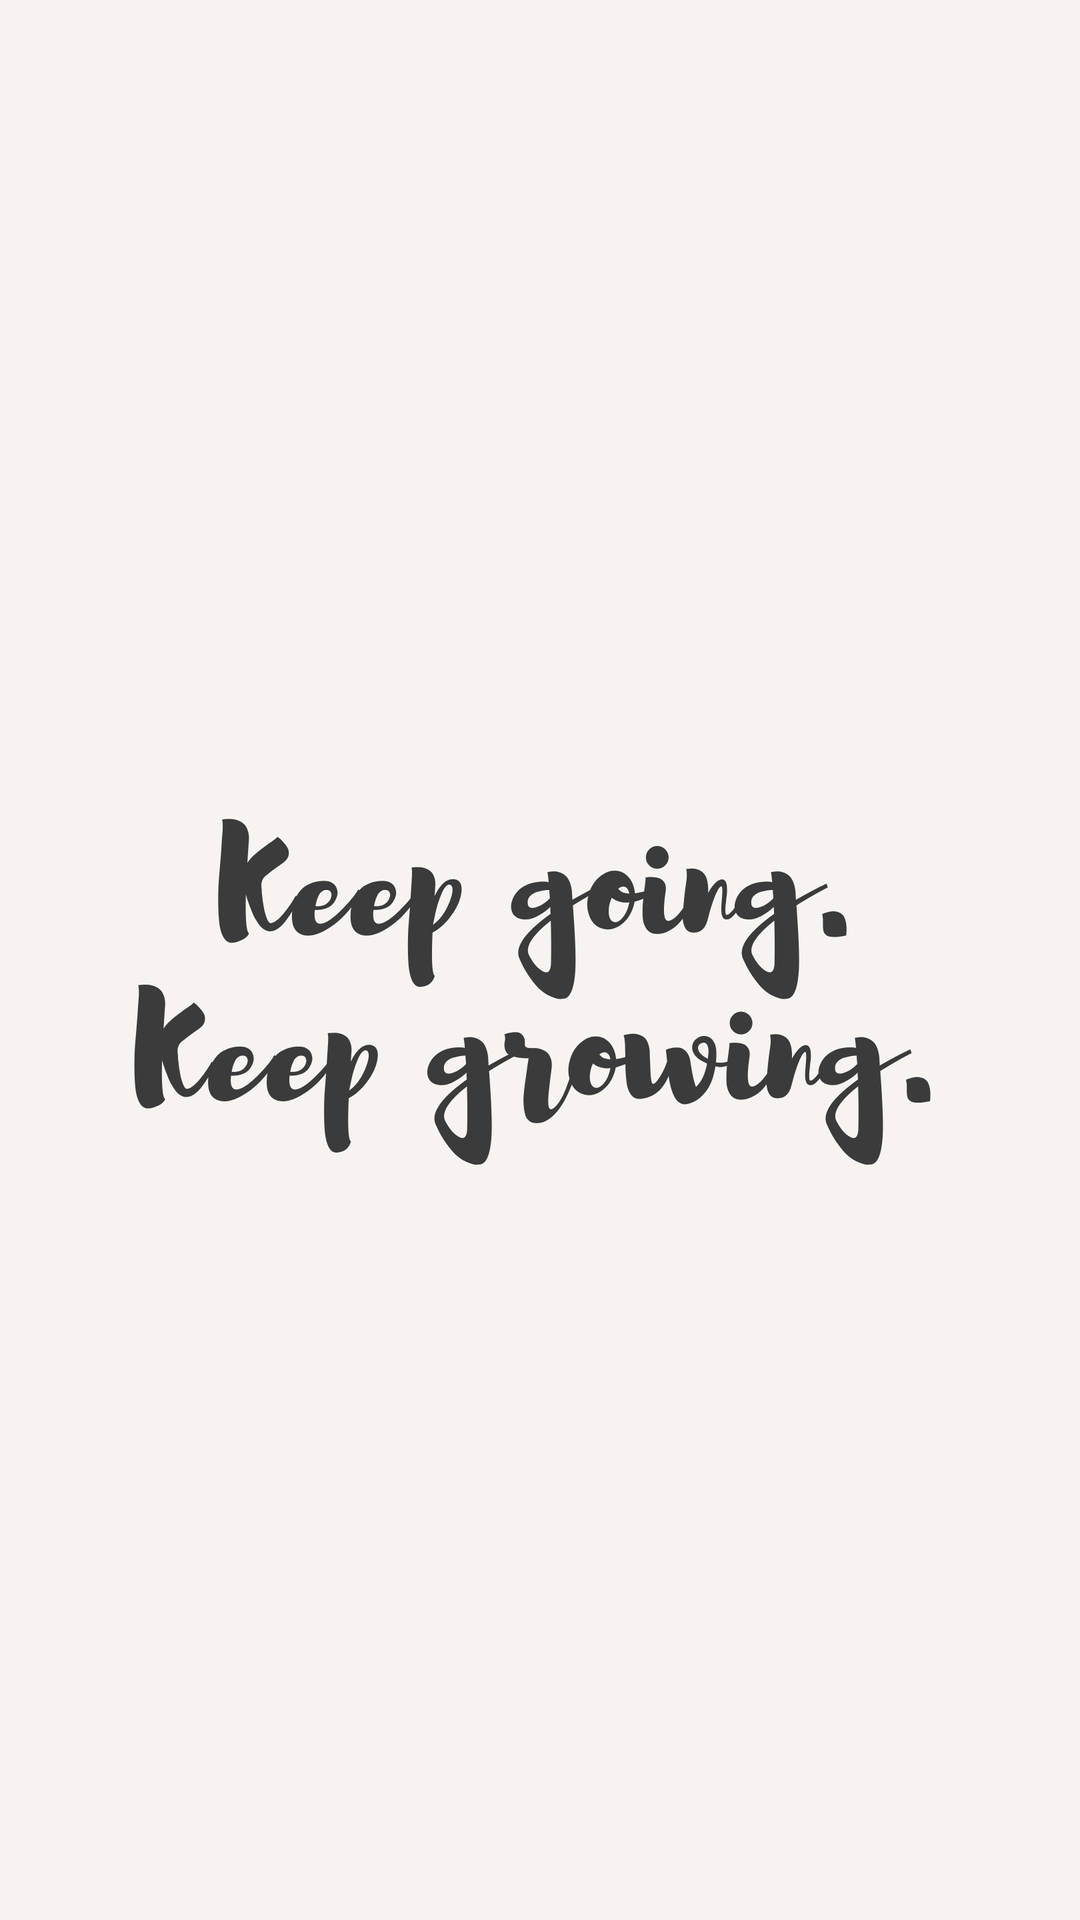 Motivational Quote Keep Going